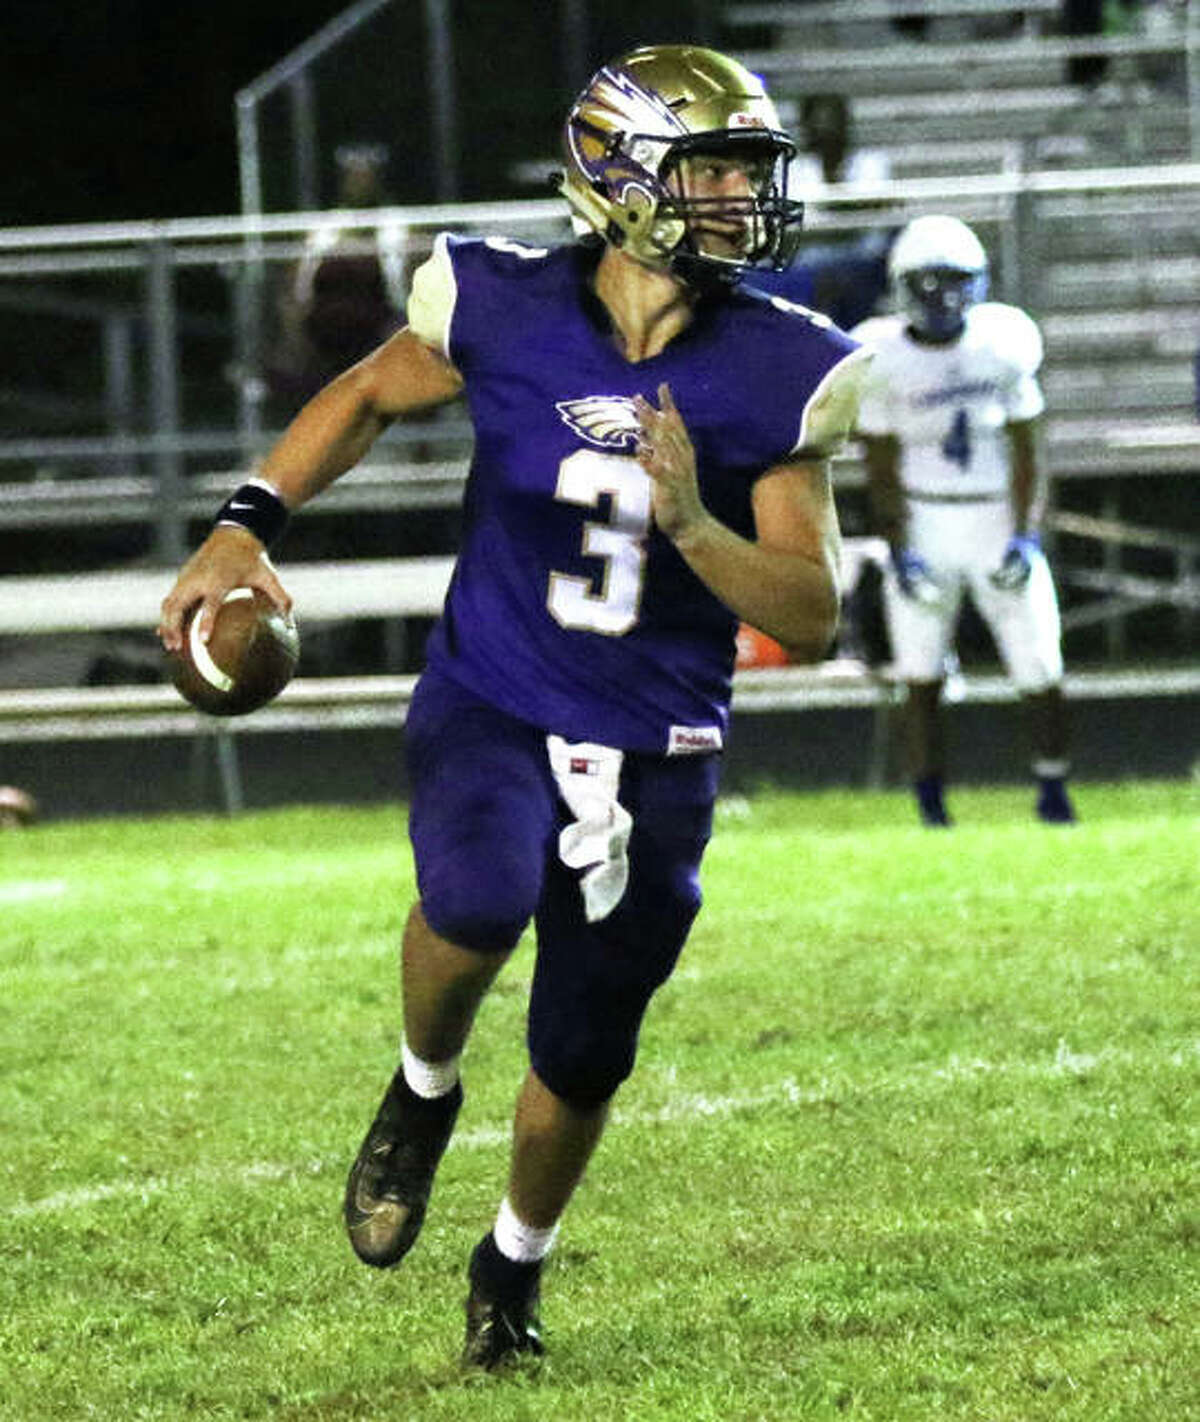 CM quarterback Noah Turbyfill was 21 of 34 for 342 yards, two touchdowns and one interception in his team’s 21-20 win over Triad Friday in Troy.